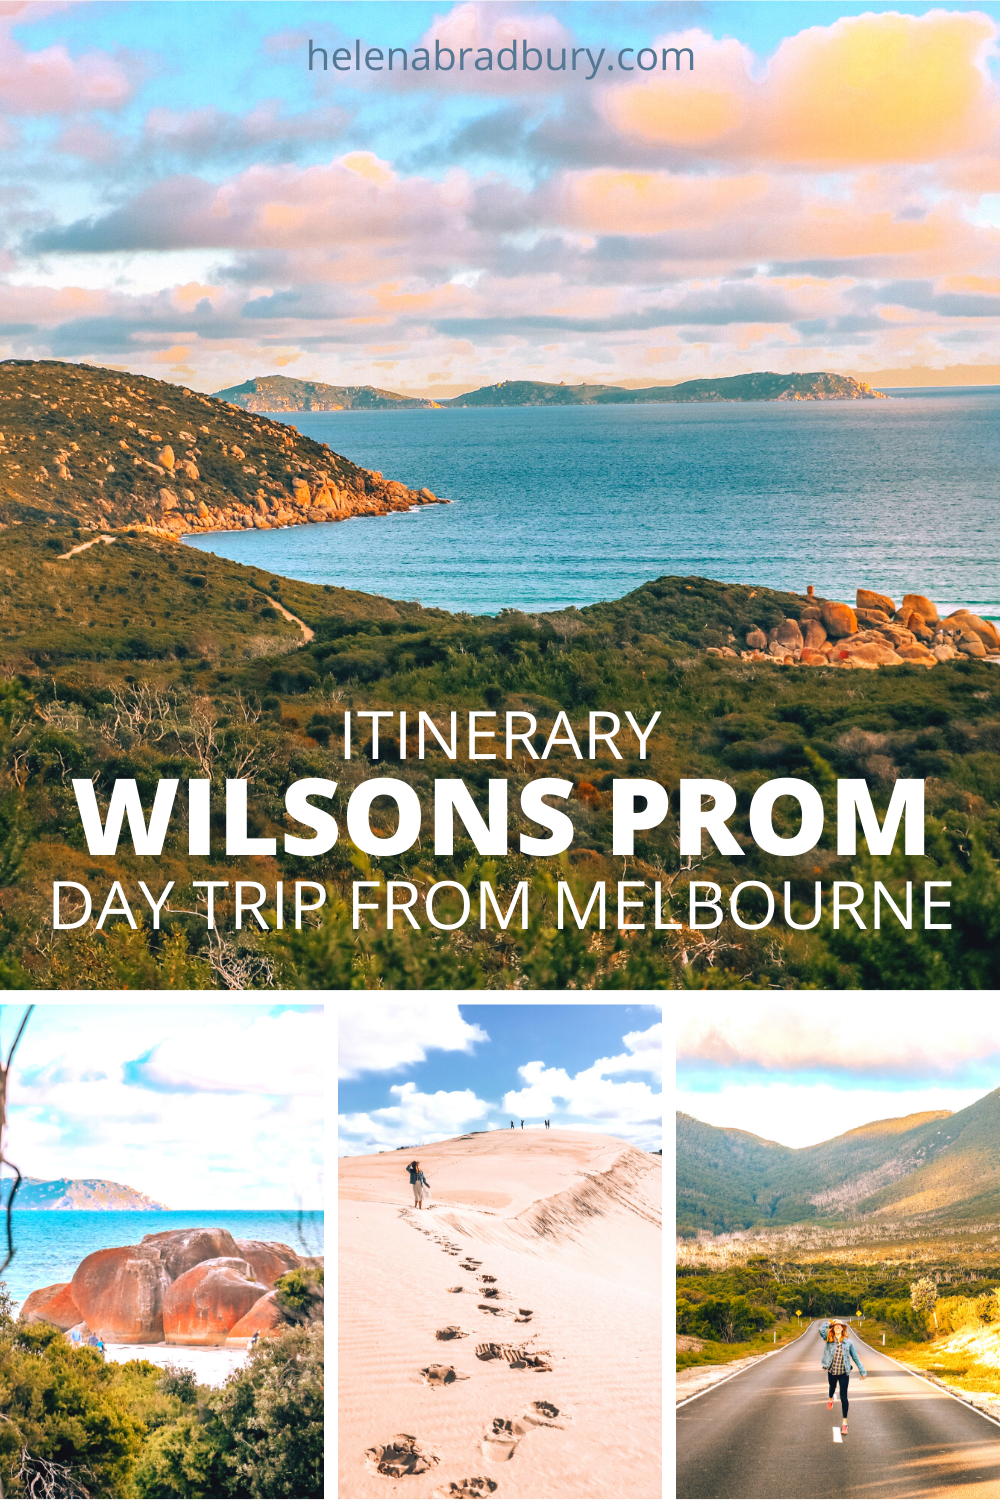 Melbourne to Wilsons Prom day trip itinerary | Helena Bradbury travel blog | Melbourne to wilsons promontory national park | wilson promontory melbourne | how to get to wilsons prom from Melbourne | wilsons prom day hikes | wilsons promontory day tr…